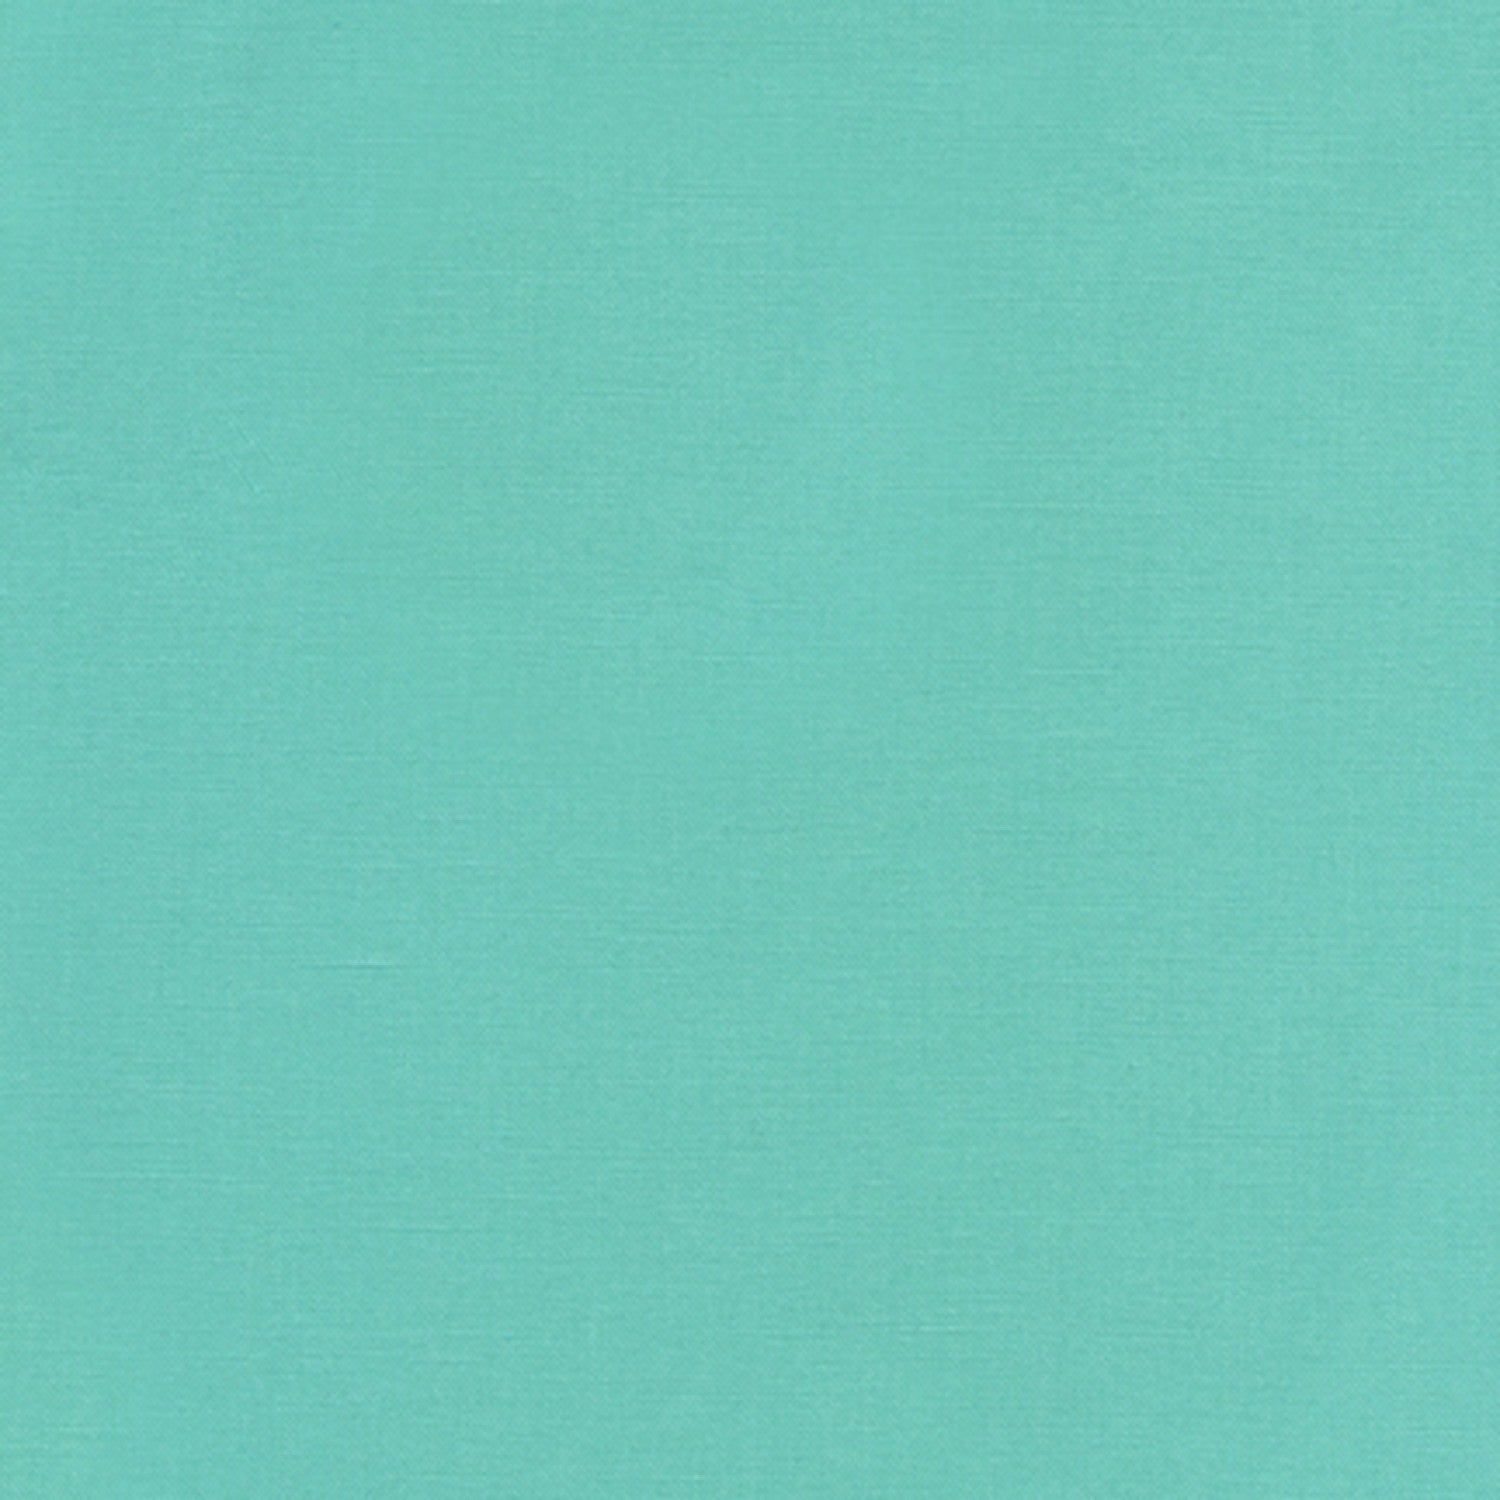 Kona Cotton Solids Candy Green fabric thumbnail image for true color reference